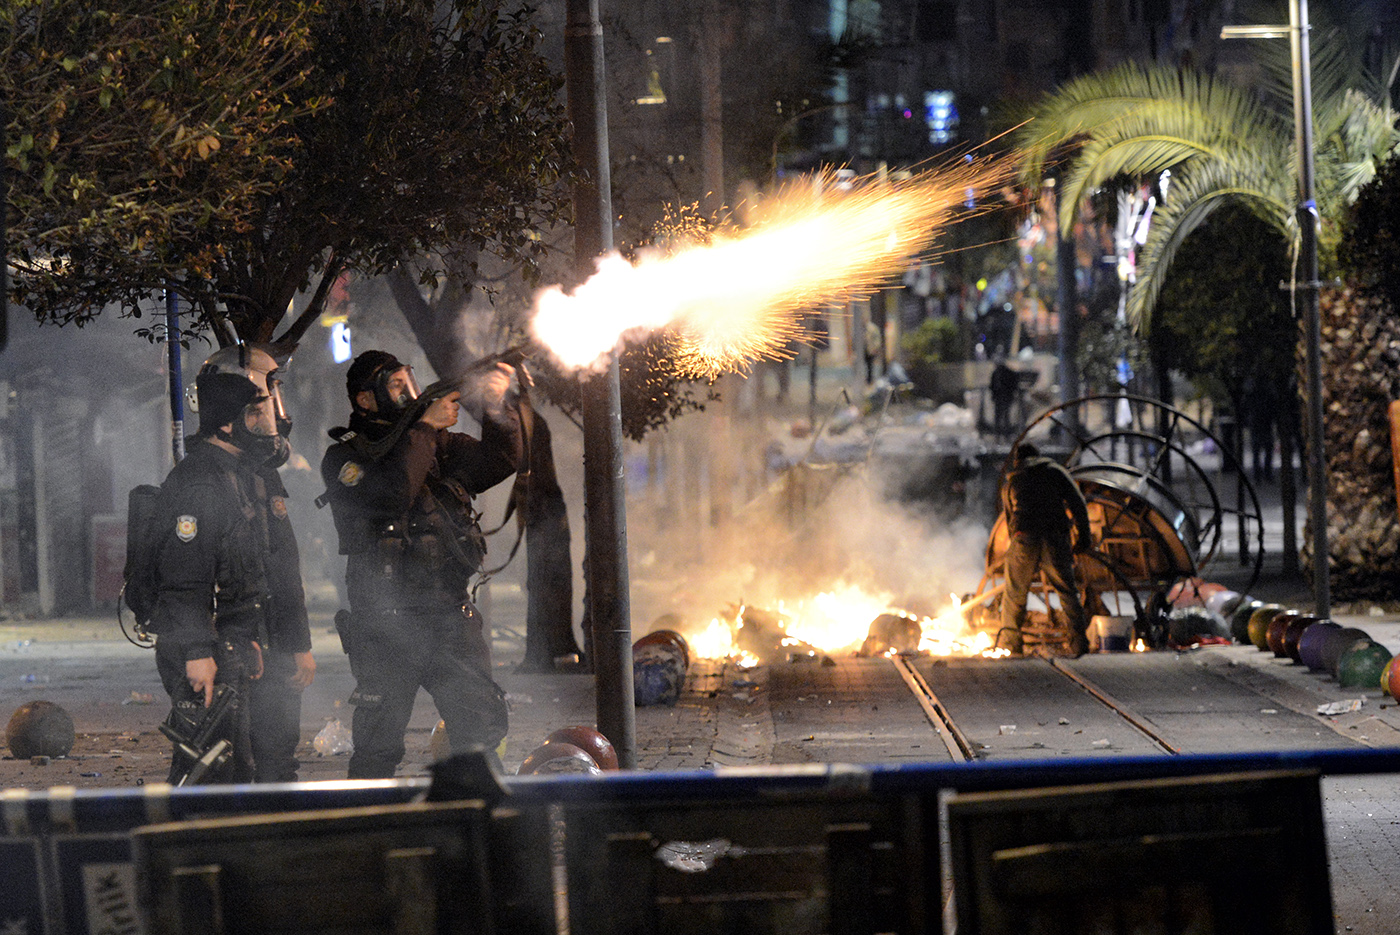 Turkish riot police fires tear gas to disperse protesters during a demonstration after 15 years old Berkin Elvan dead who was dead after struck on the head by a police tear gas in Istanbul, Turkey, 11 March 2014.